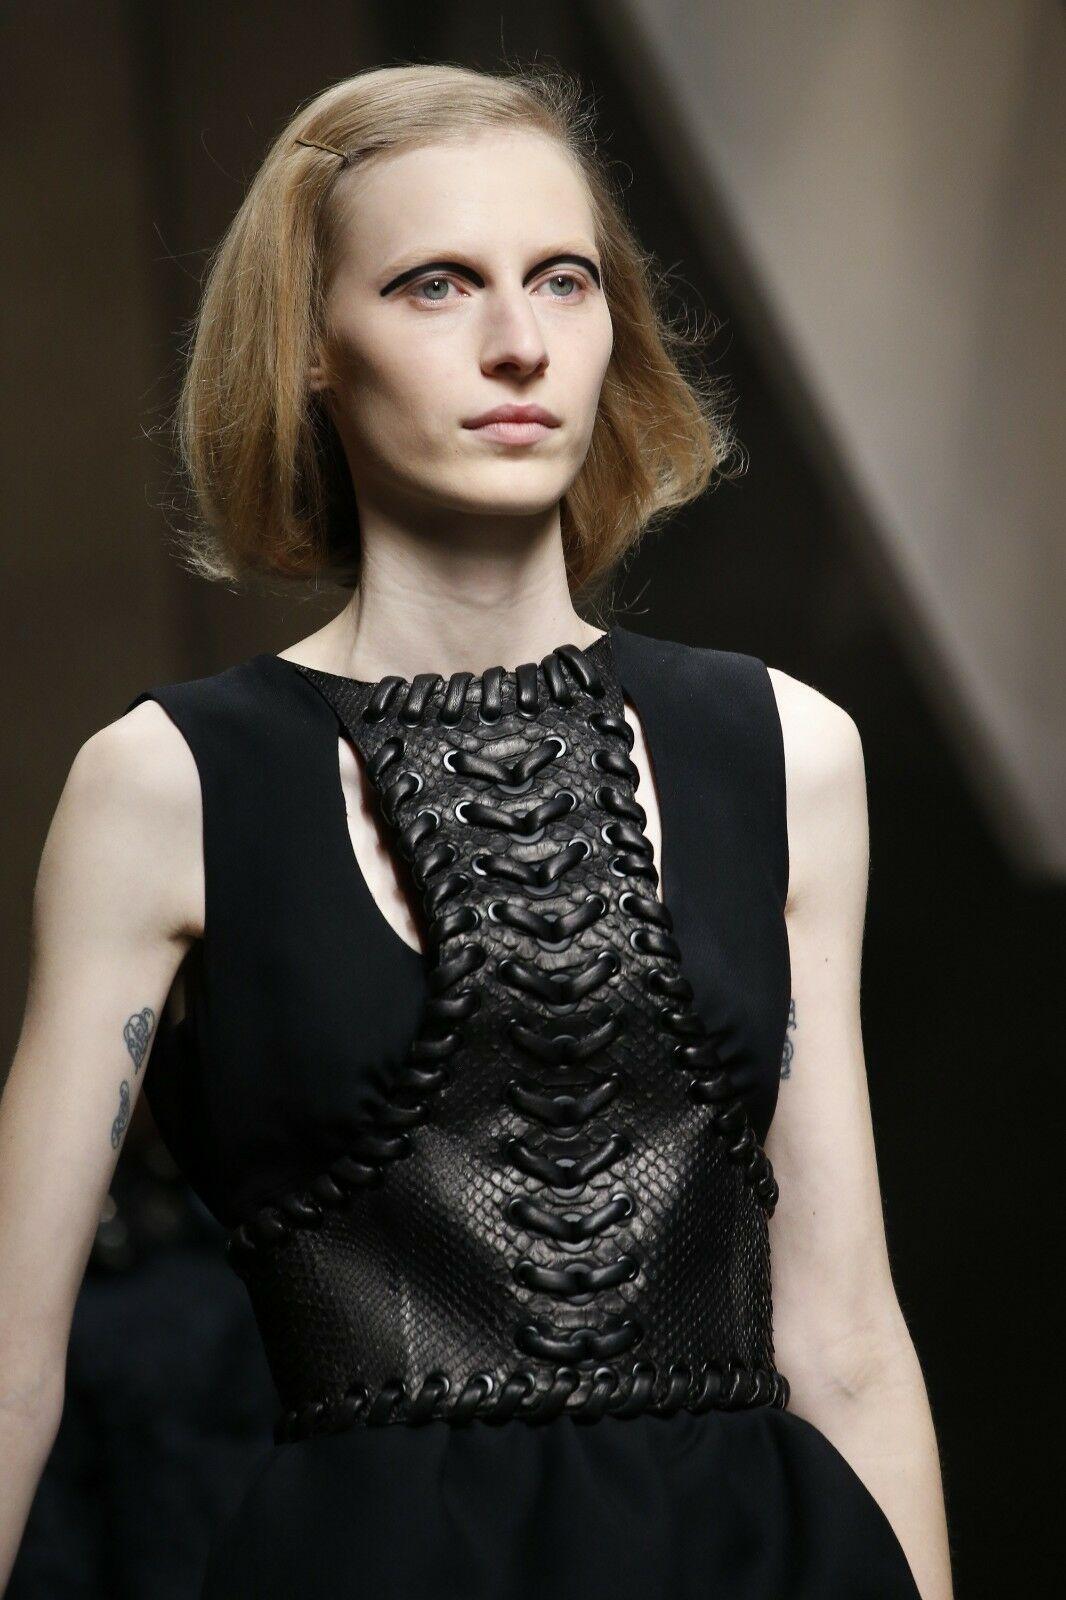 runway FENDI SS16 black leather braided edge bondage harness vest top IT40 S

FENDI
FROM THE SPRING SUMMER 2016 RUNWAY
Black leather. Thick padded wraparound braided detail along edges. 
Loop detail at front. High neck. Snap button closure at nape.